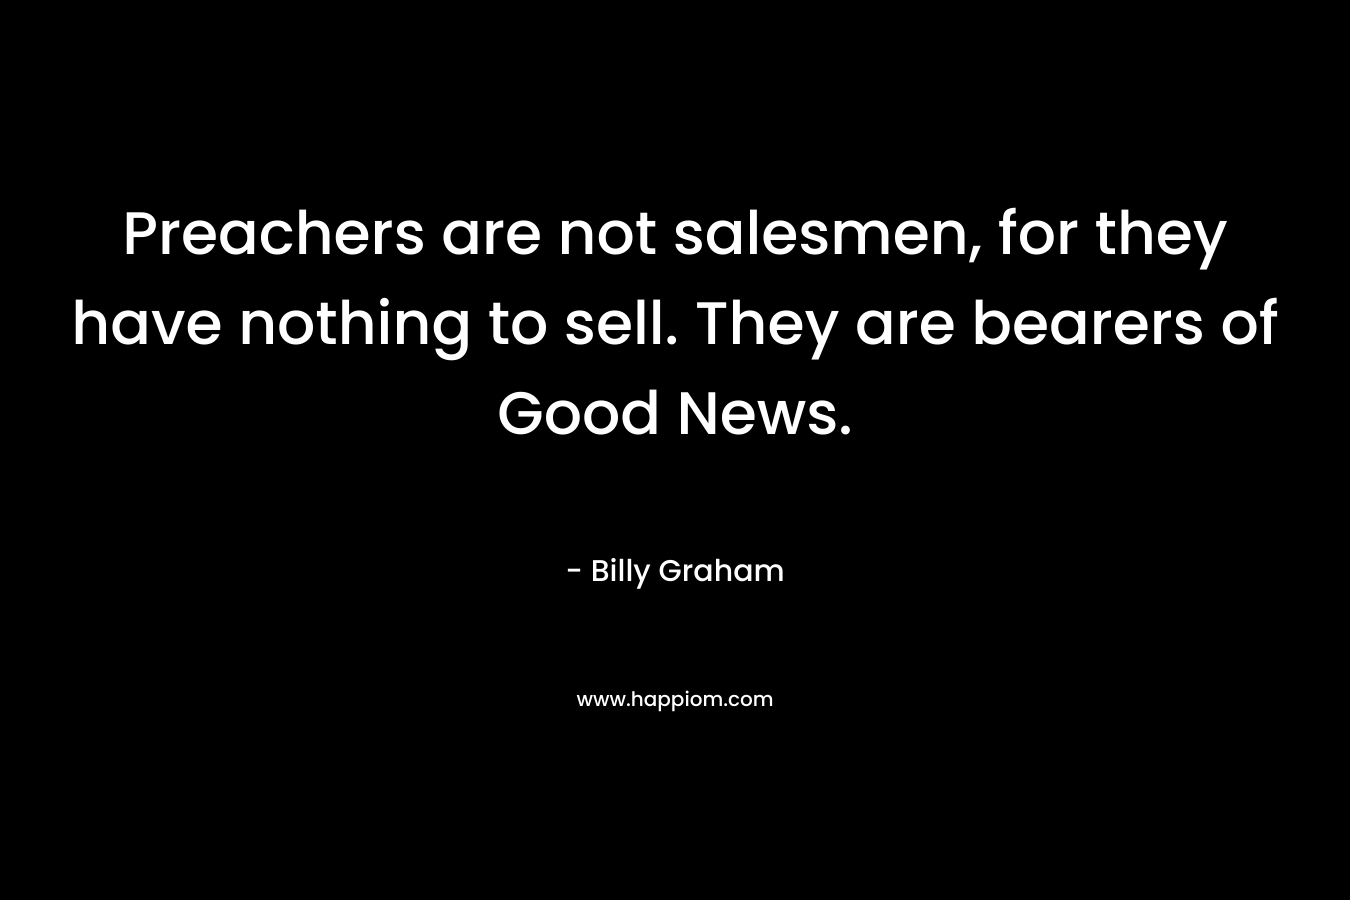 Preachers are not salesmen, for they have nothing to sell. They are bearers of Good News.